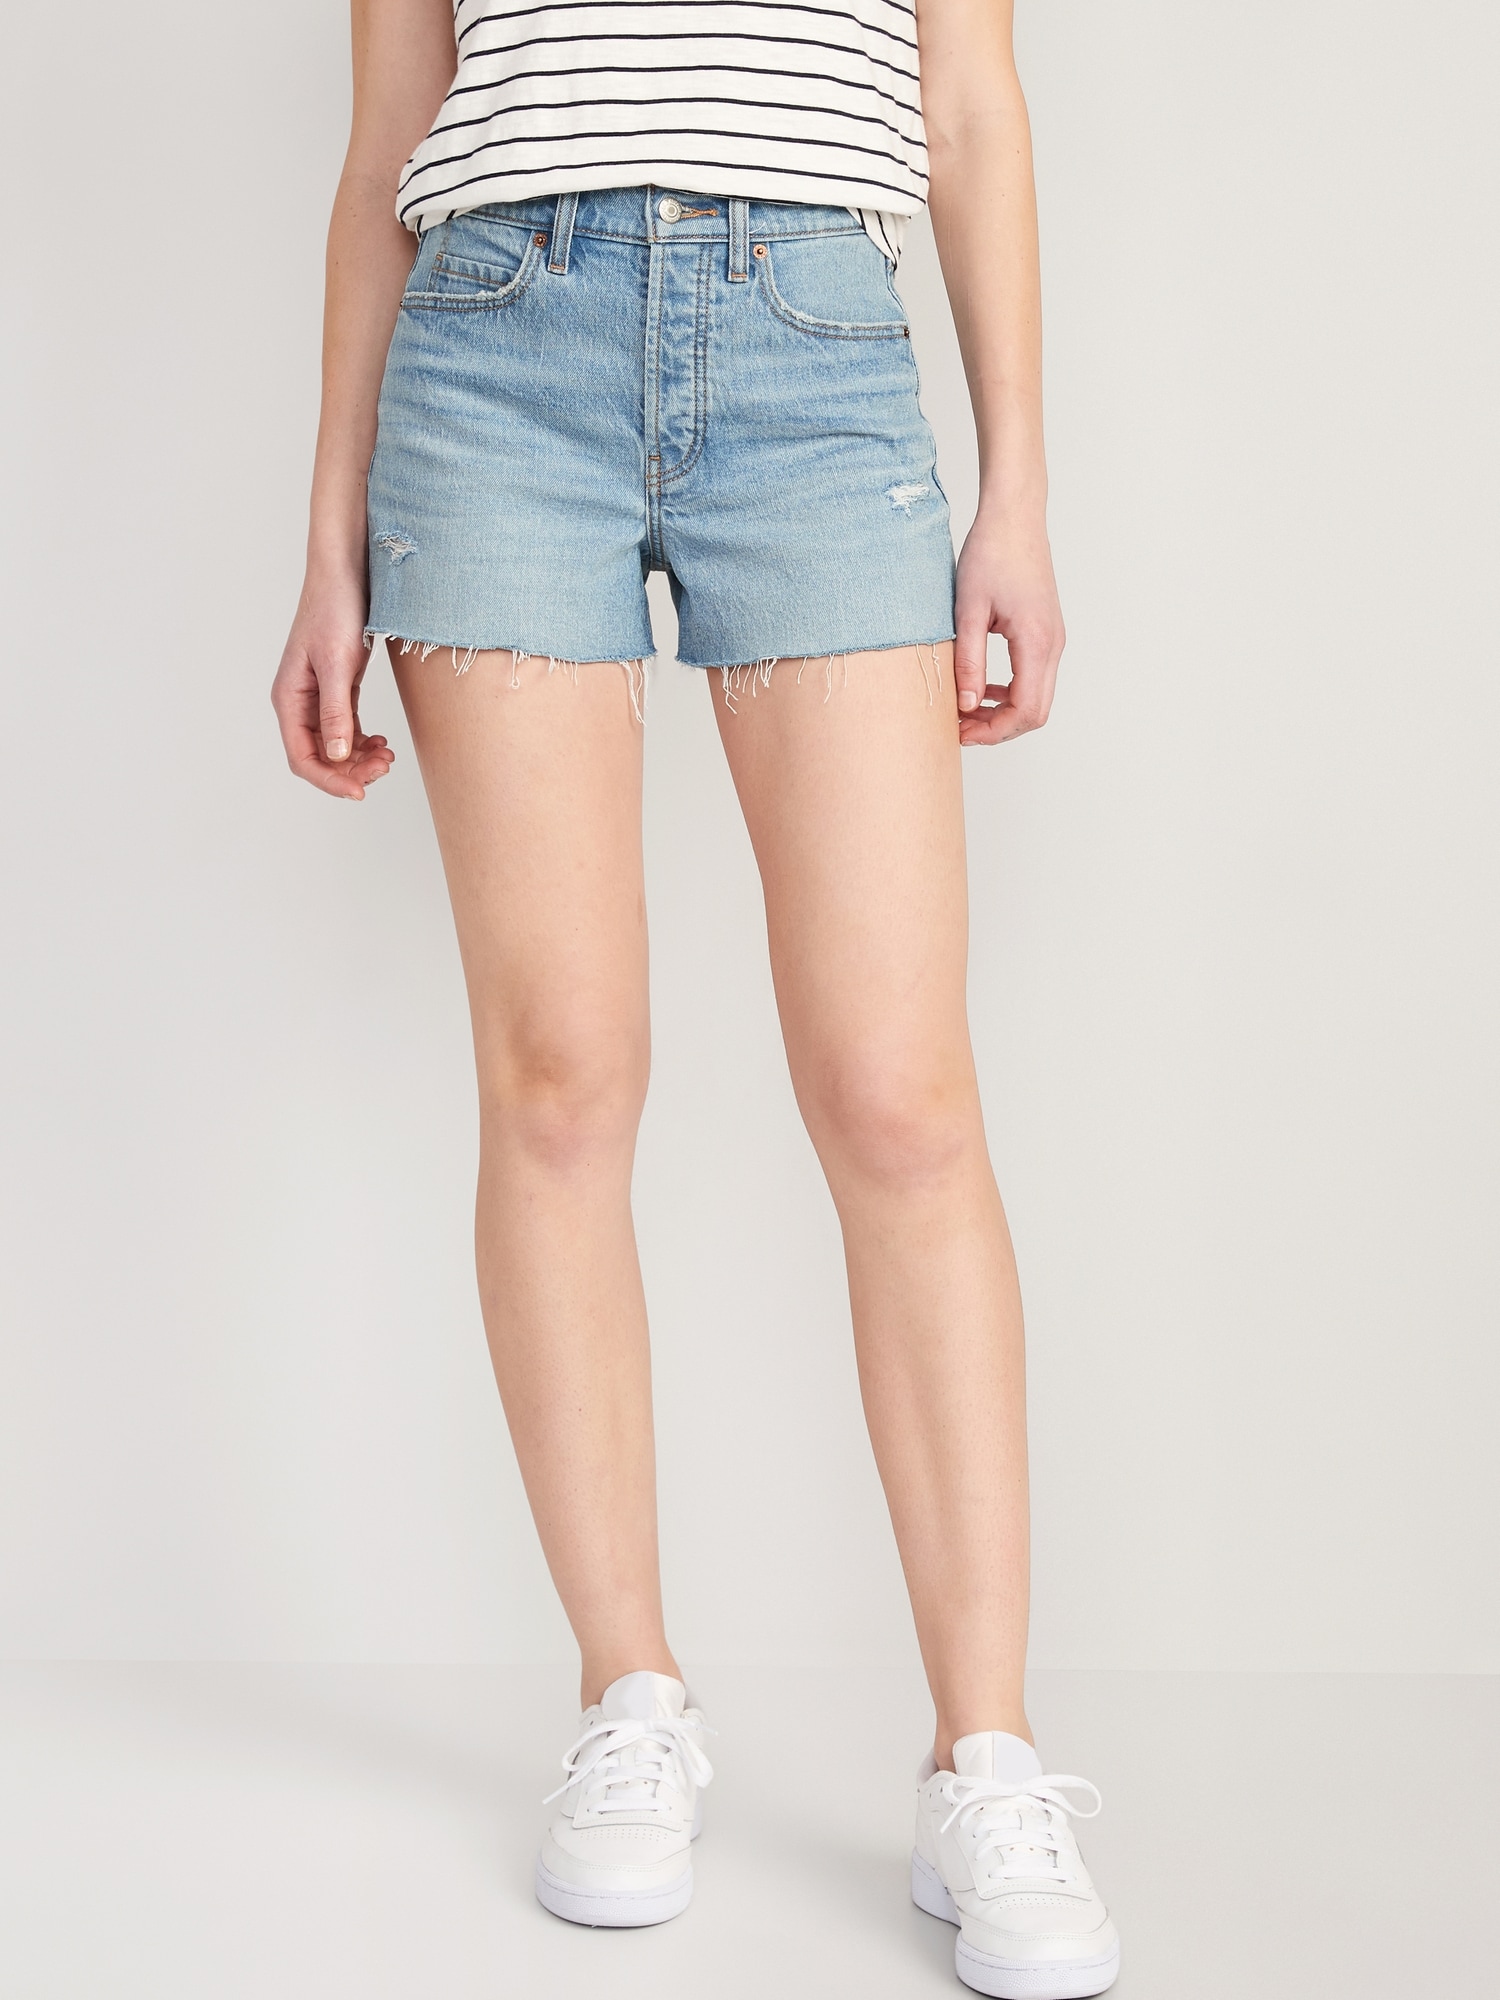 Higher High-Waisted Button-Fly Sky-Hi A-Line Cut-Off Jean Shorts -- 3-inch inseam